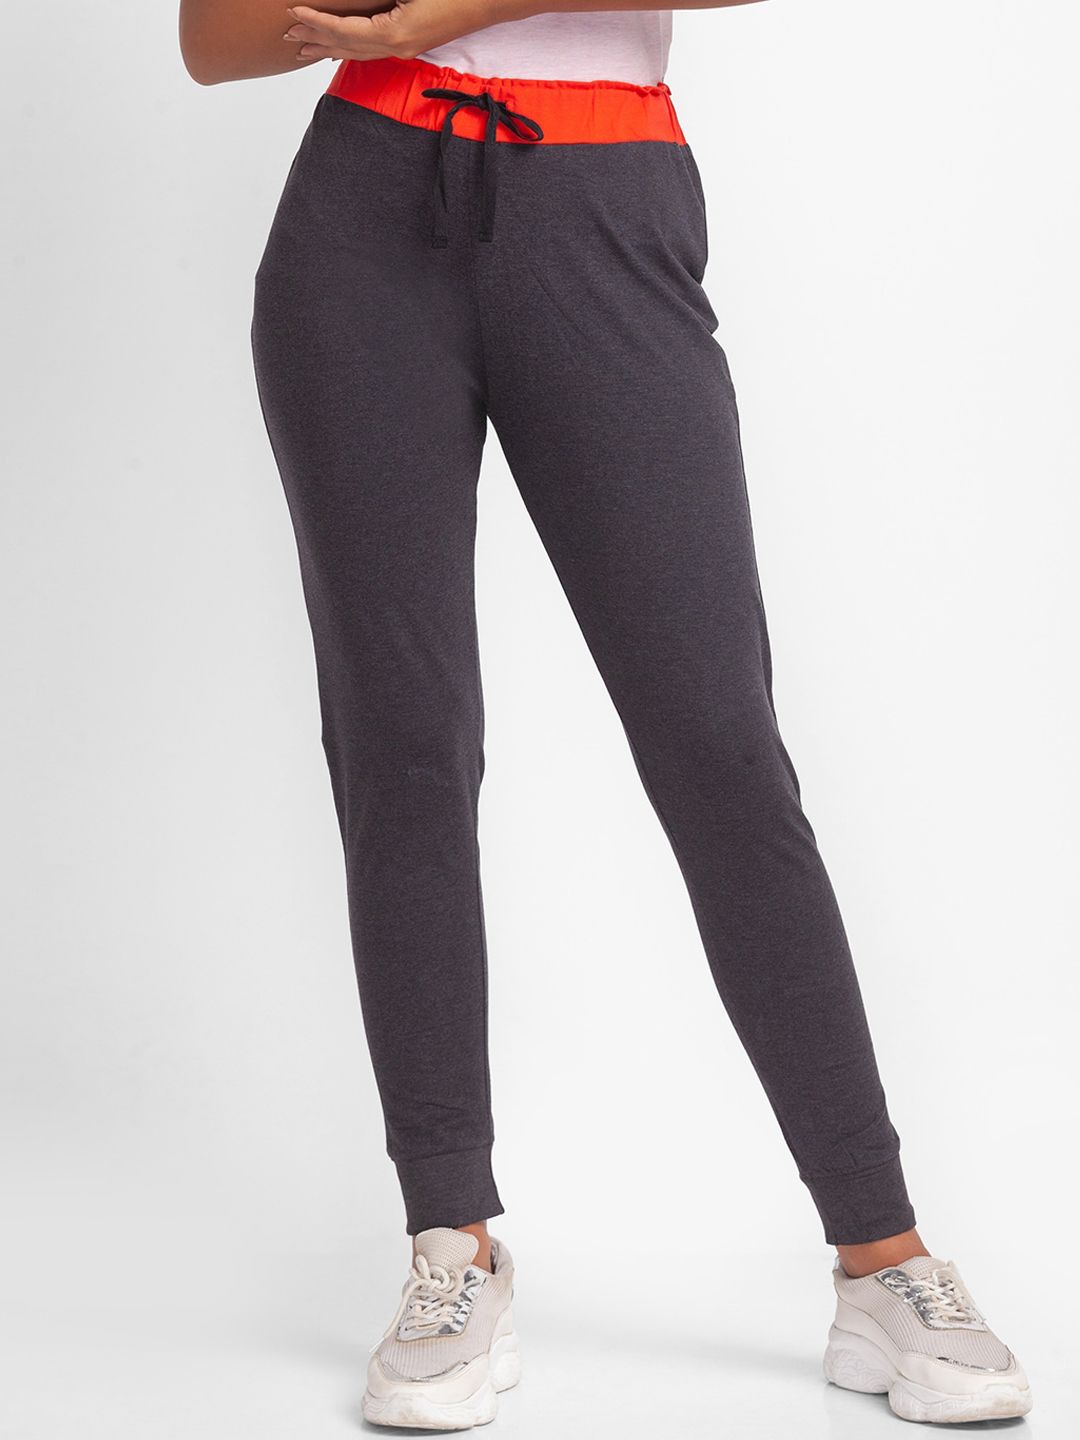 XIN Grey Charcoal & Orange Solid Lounge Pants Price in India